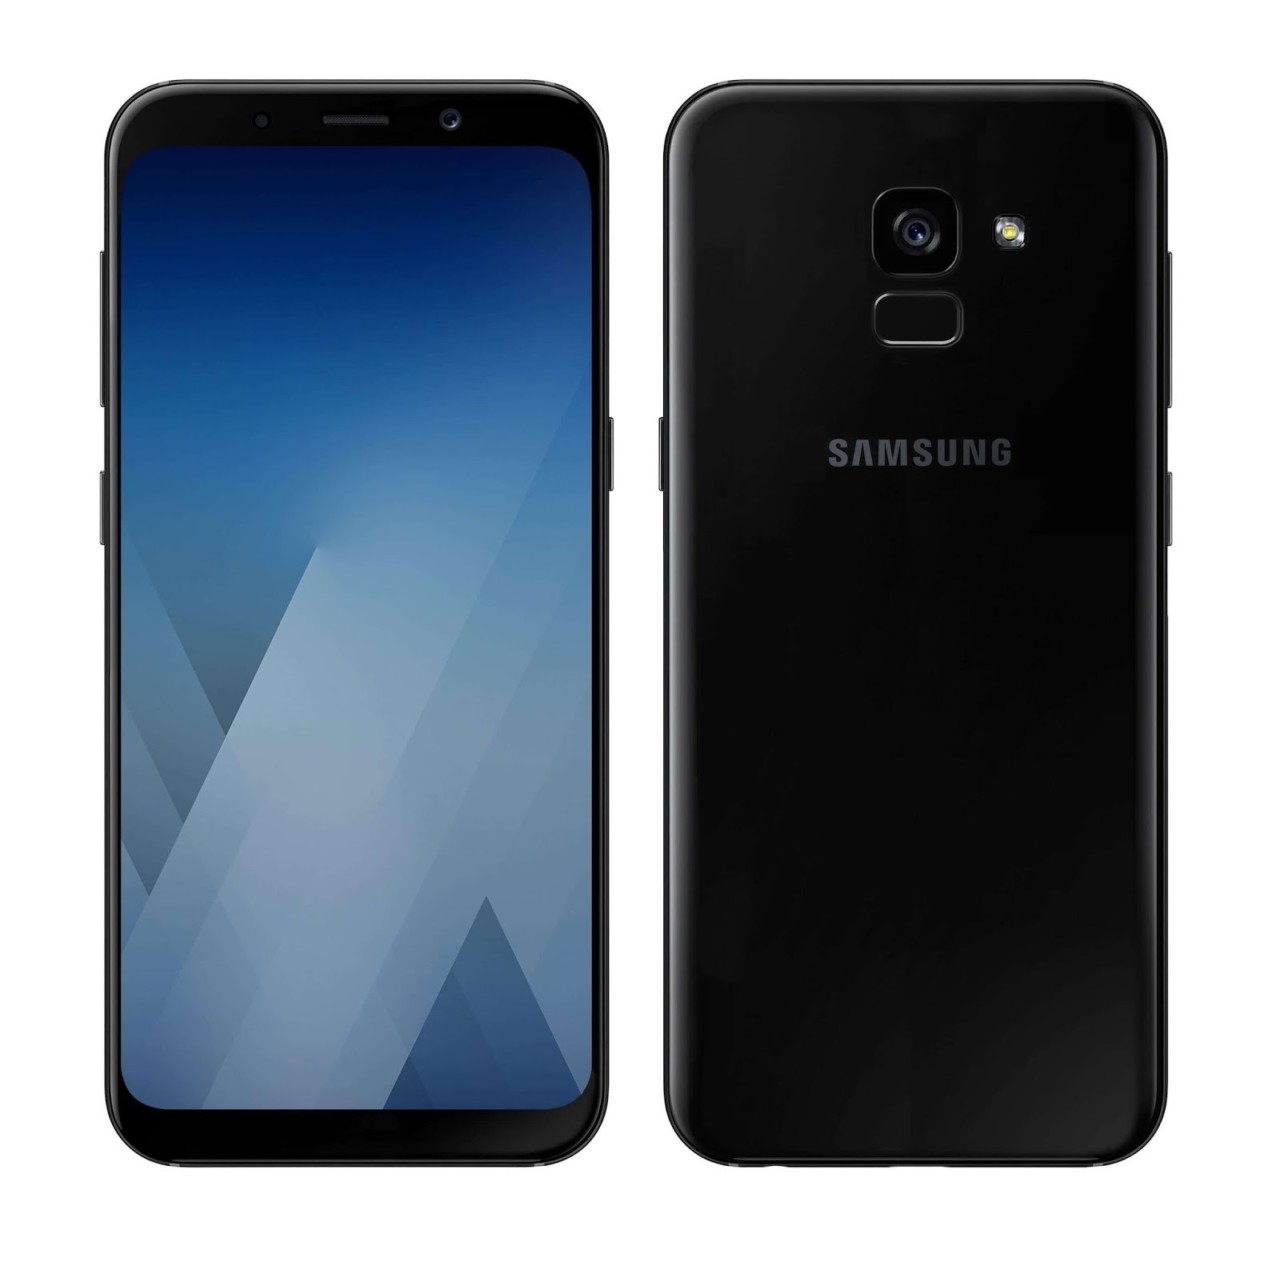 Galaxy A8 2018 Smartphone Full And Features